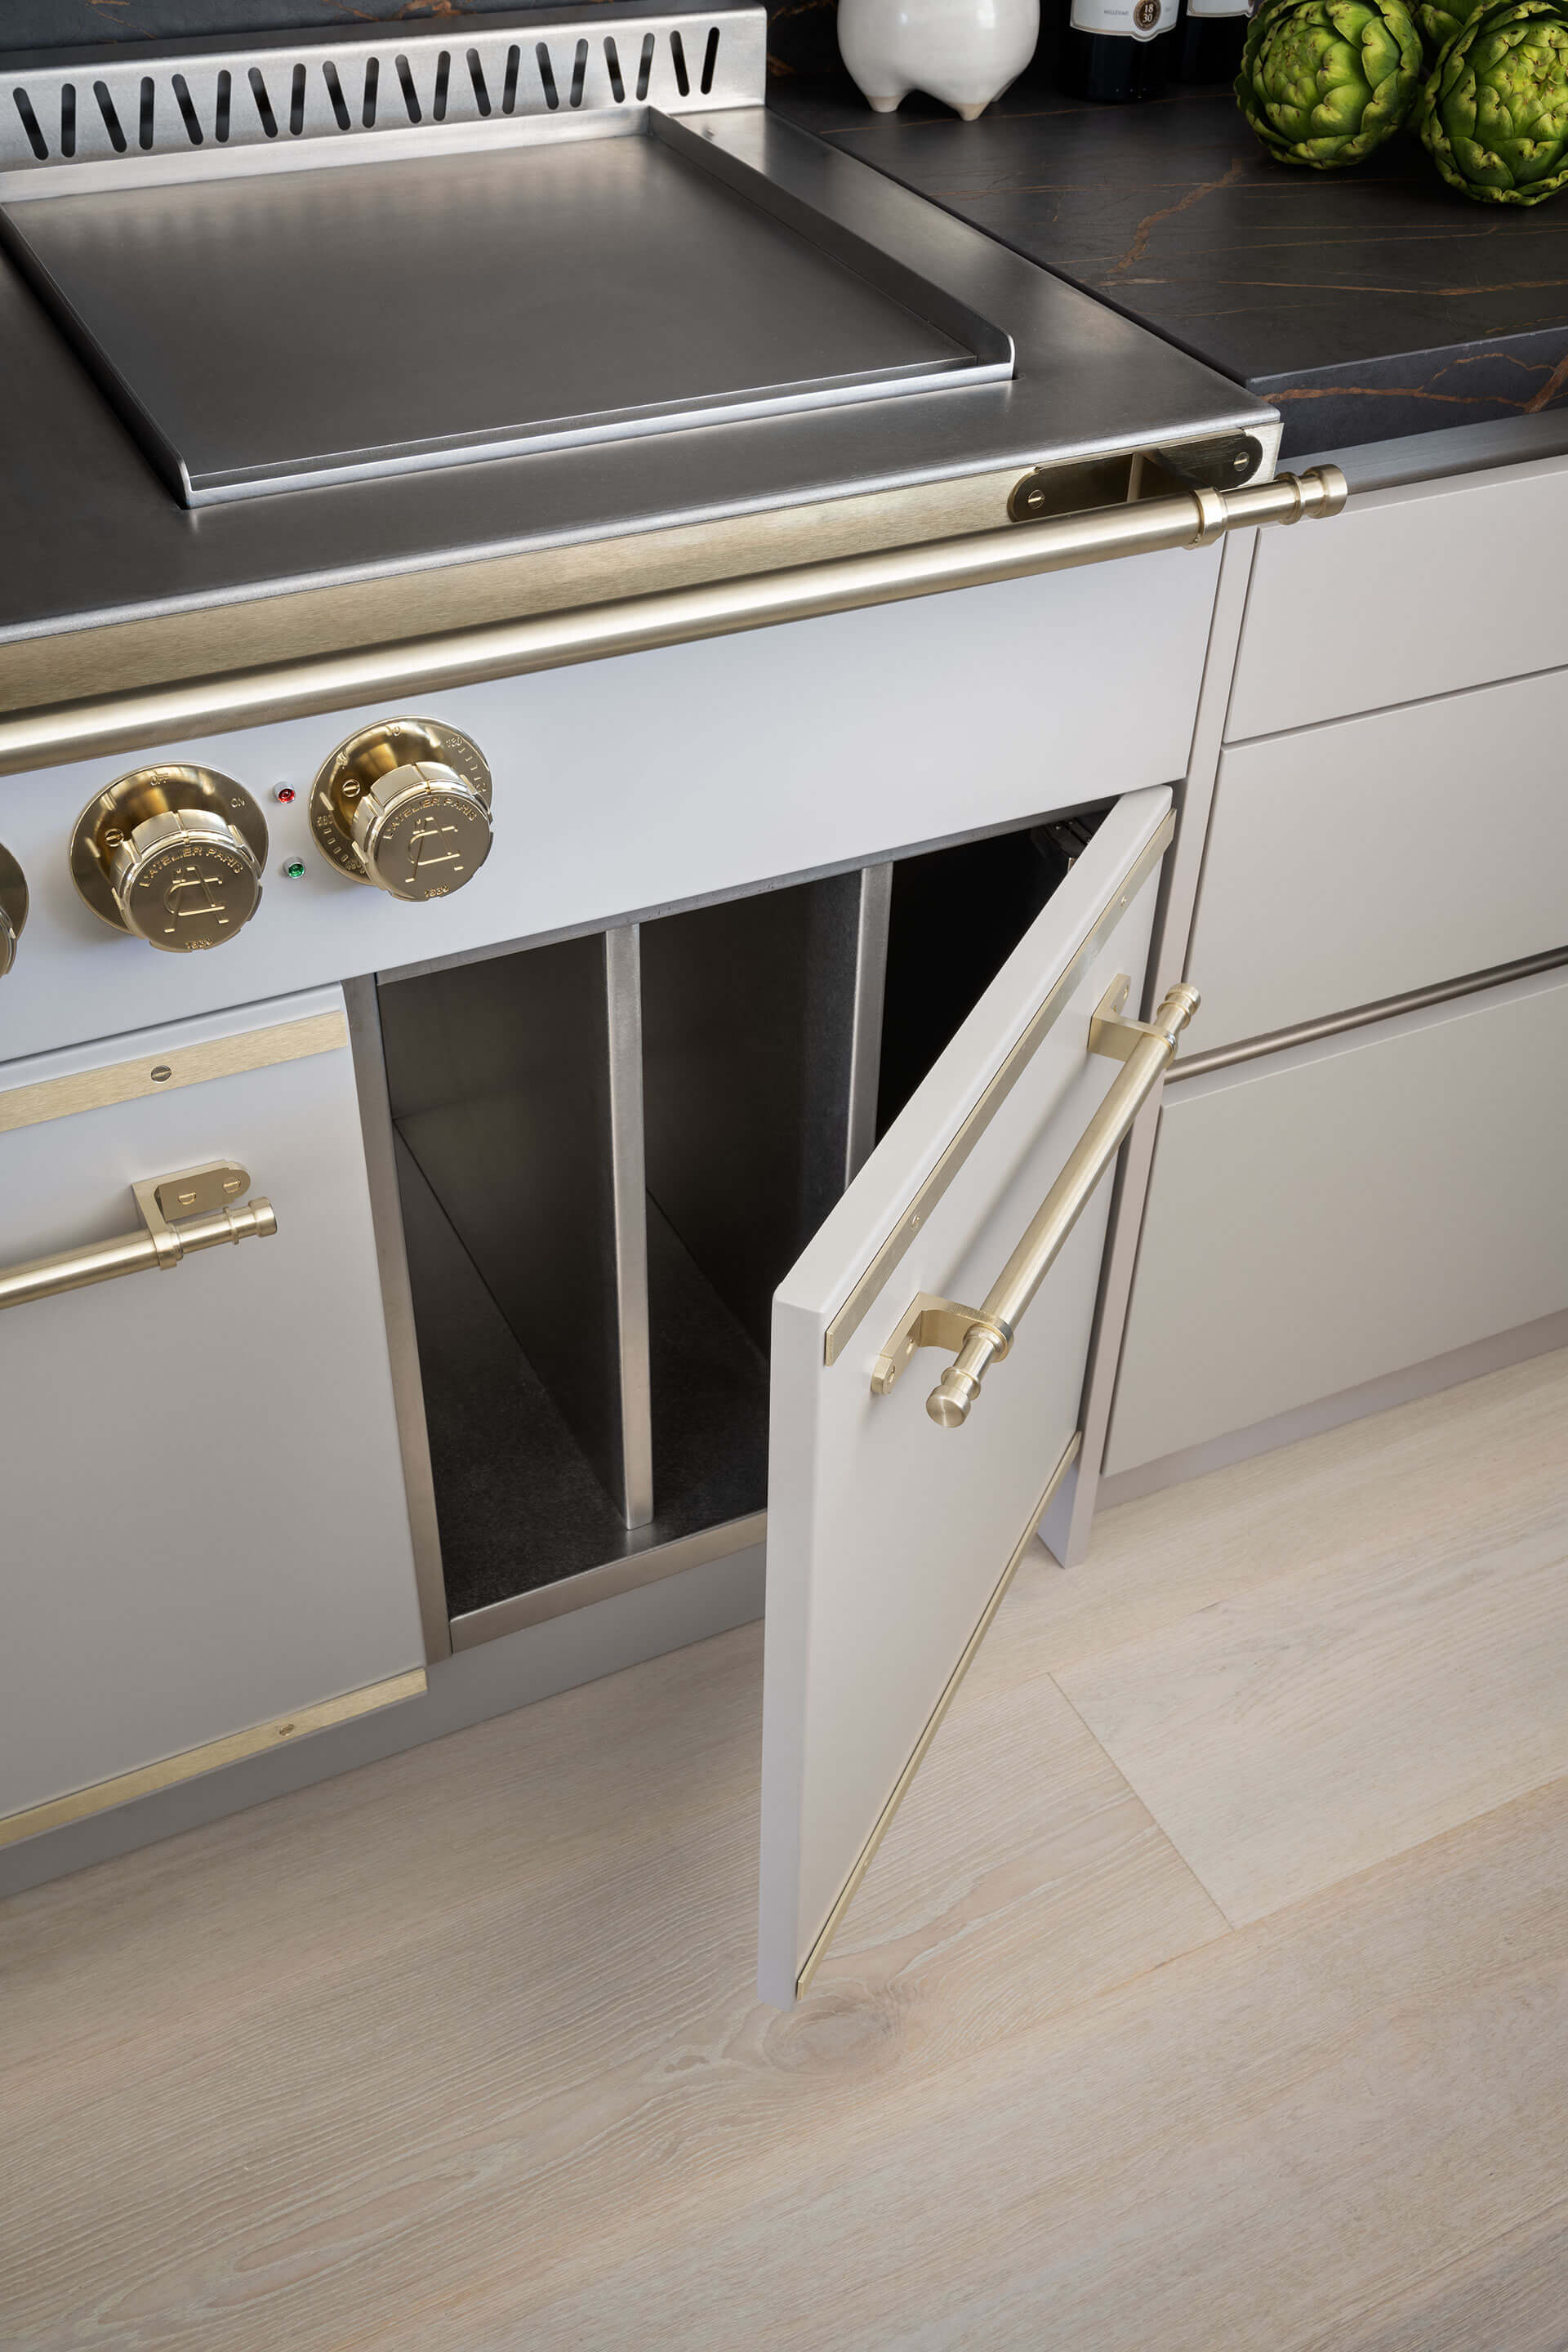 Luxury kitchen cabinets in white colors with golden handles